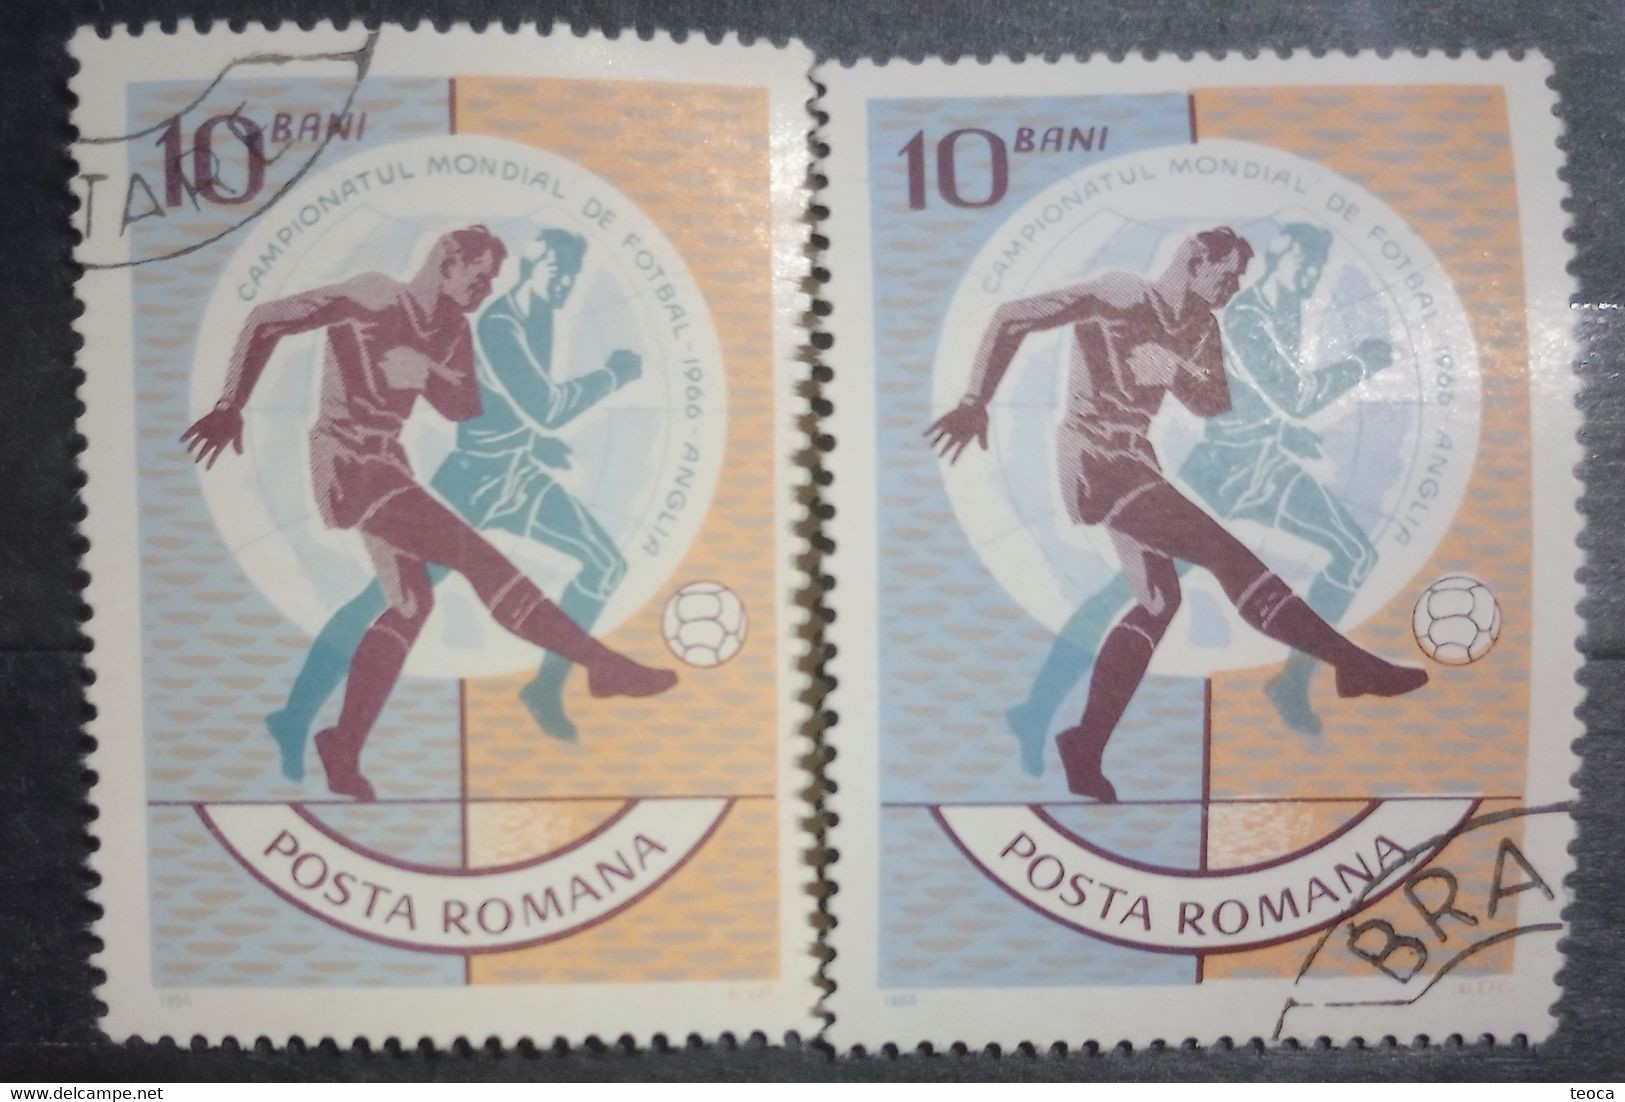 Stamps Errors Romania 1966 soccer World cup 1966 England lot WITH 20 Errors printed diffrent Errors misplaced player